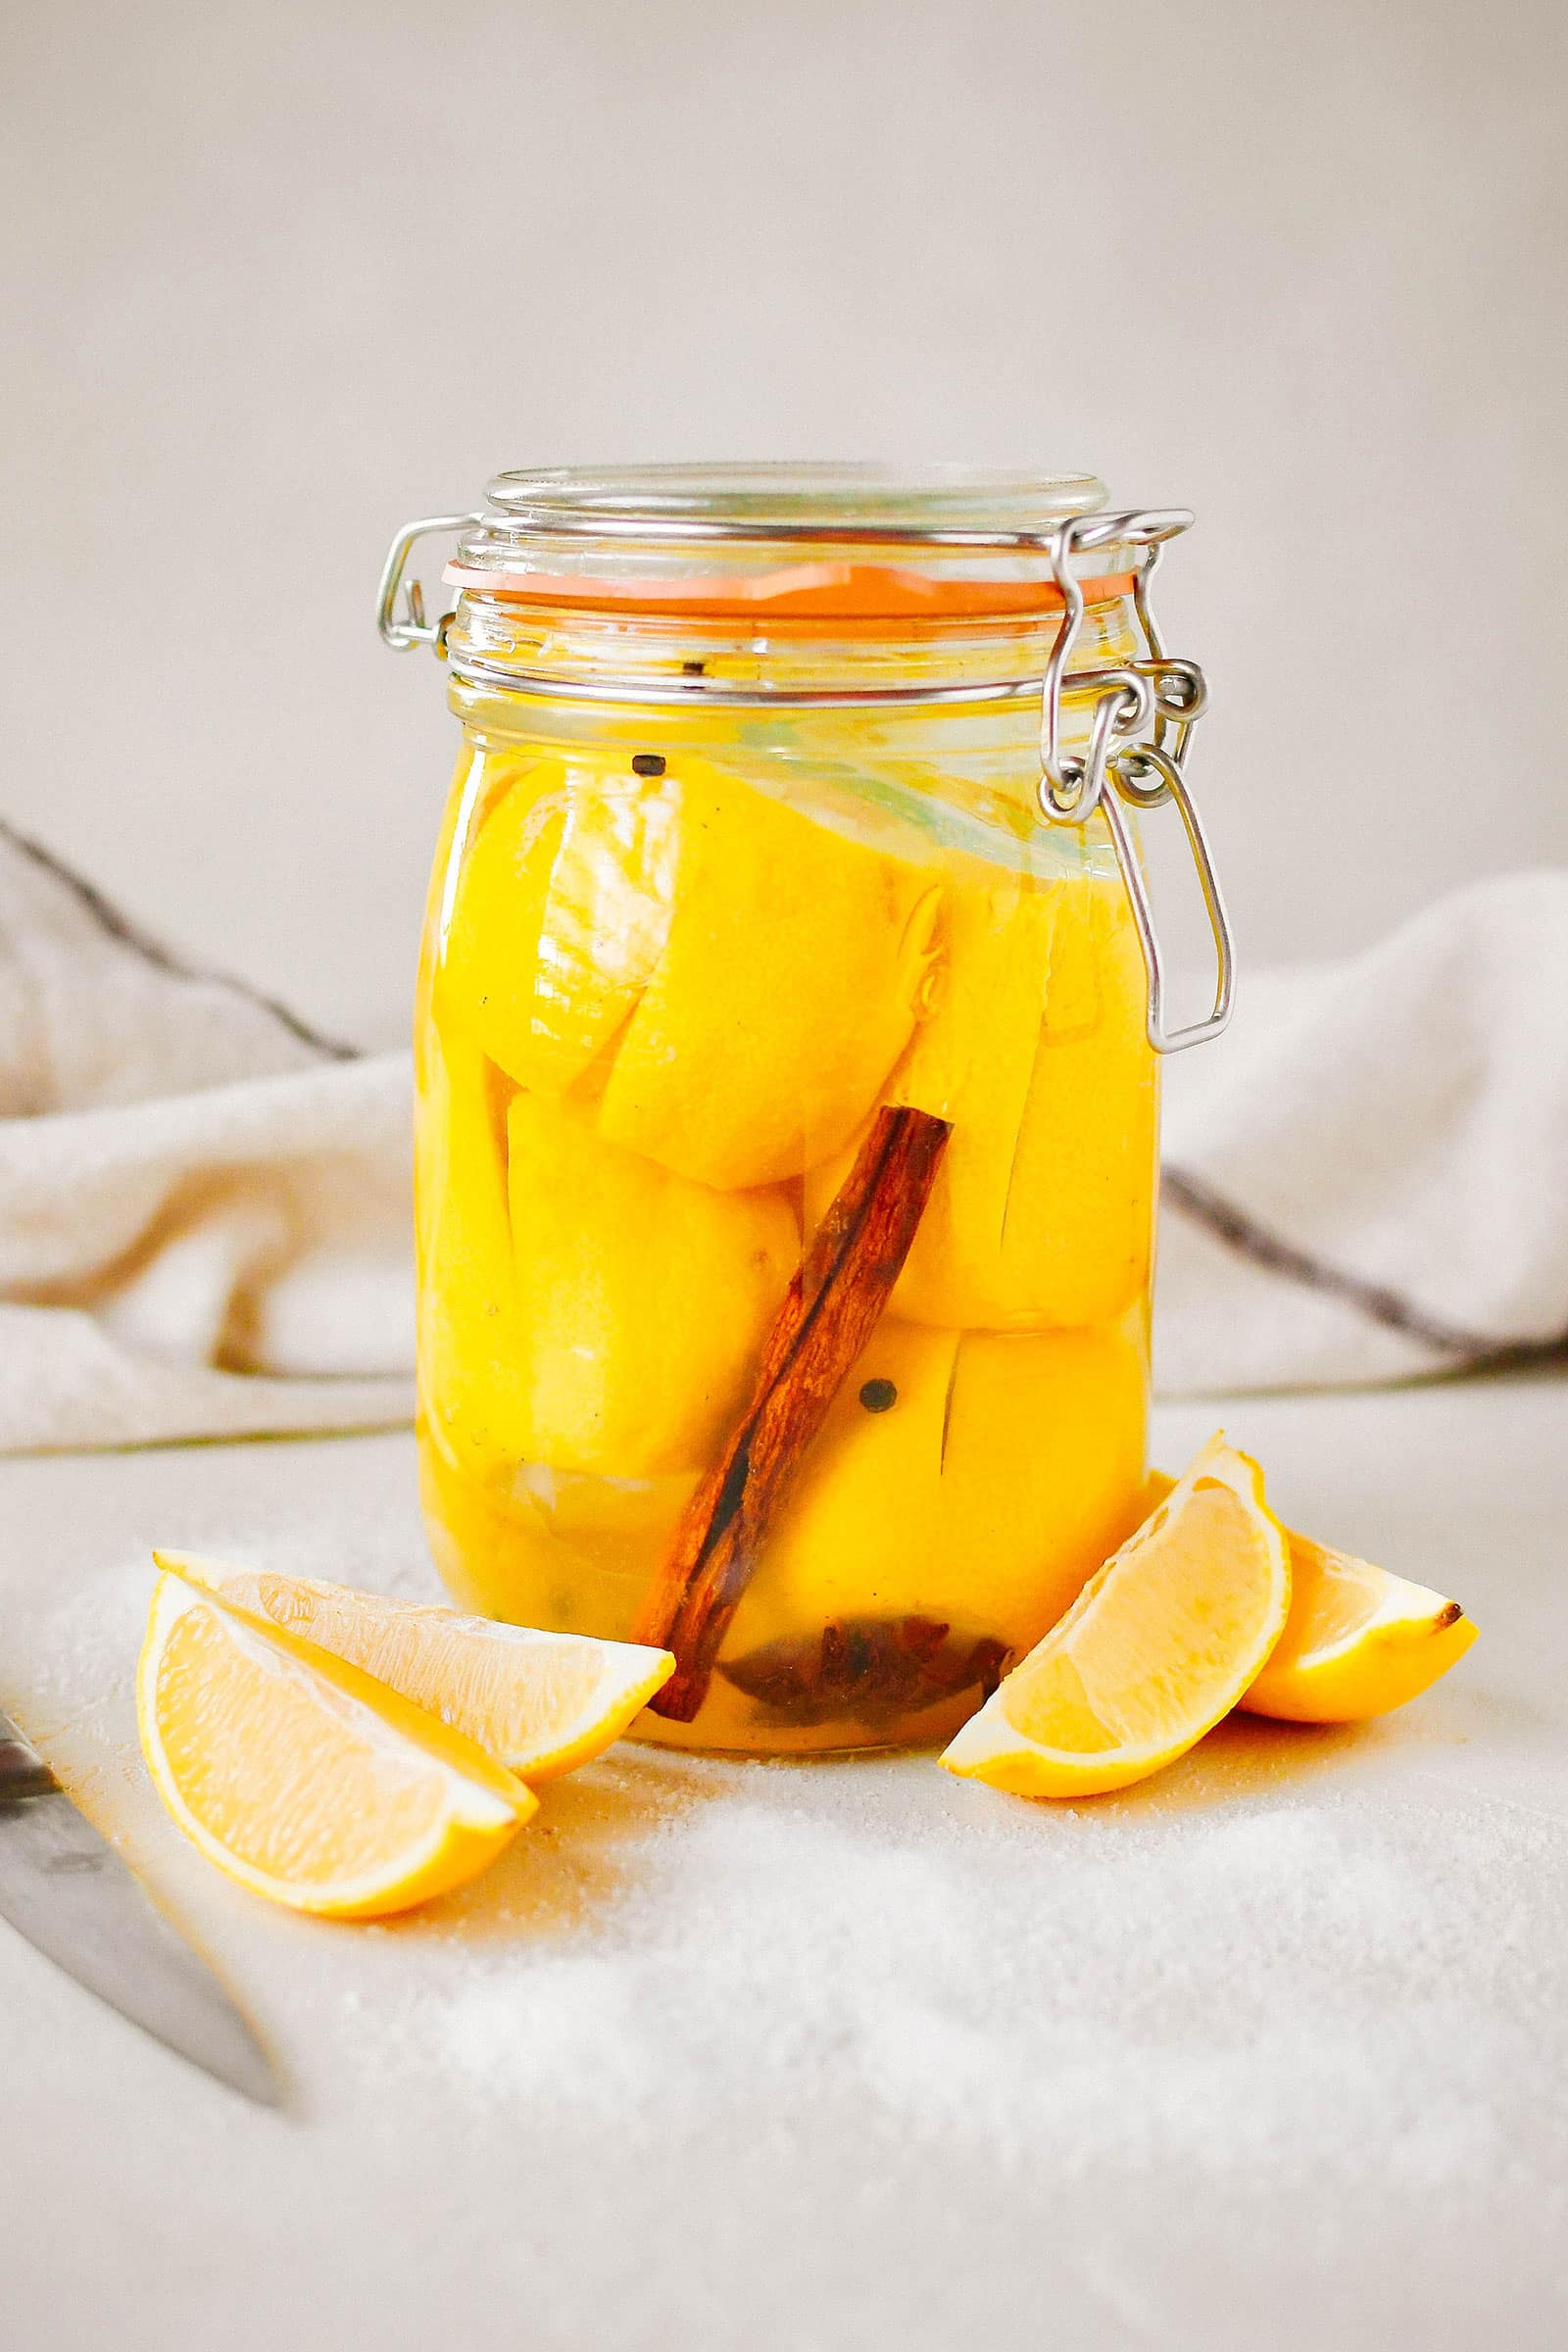 Stylized shot of a jar of Moroccan preserved lemons with cut lemons arranged around it and a linen napkin in the background